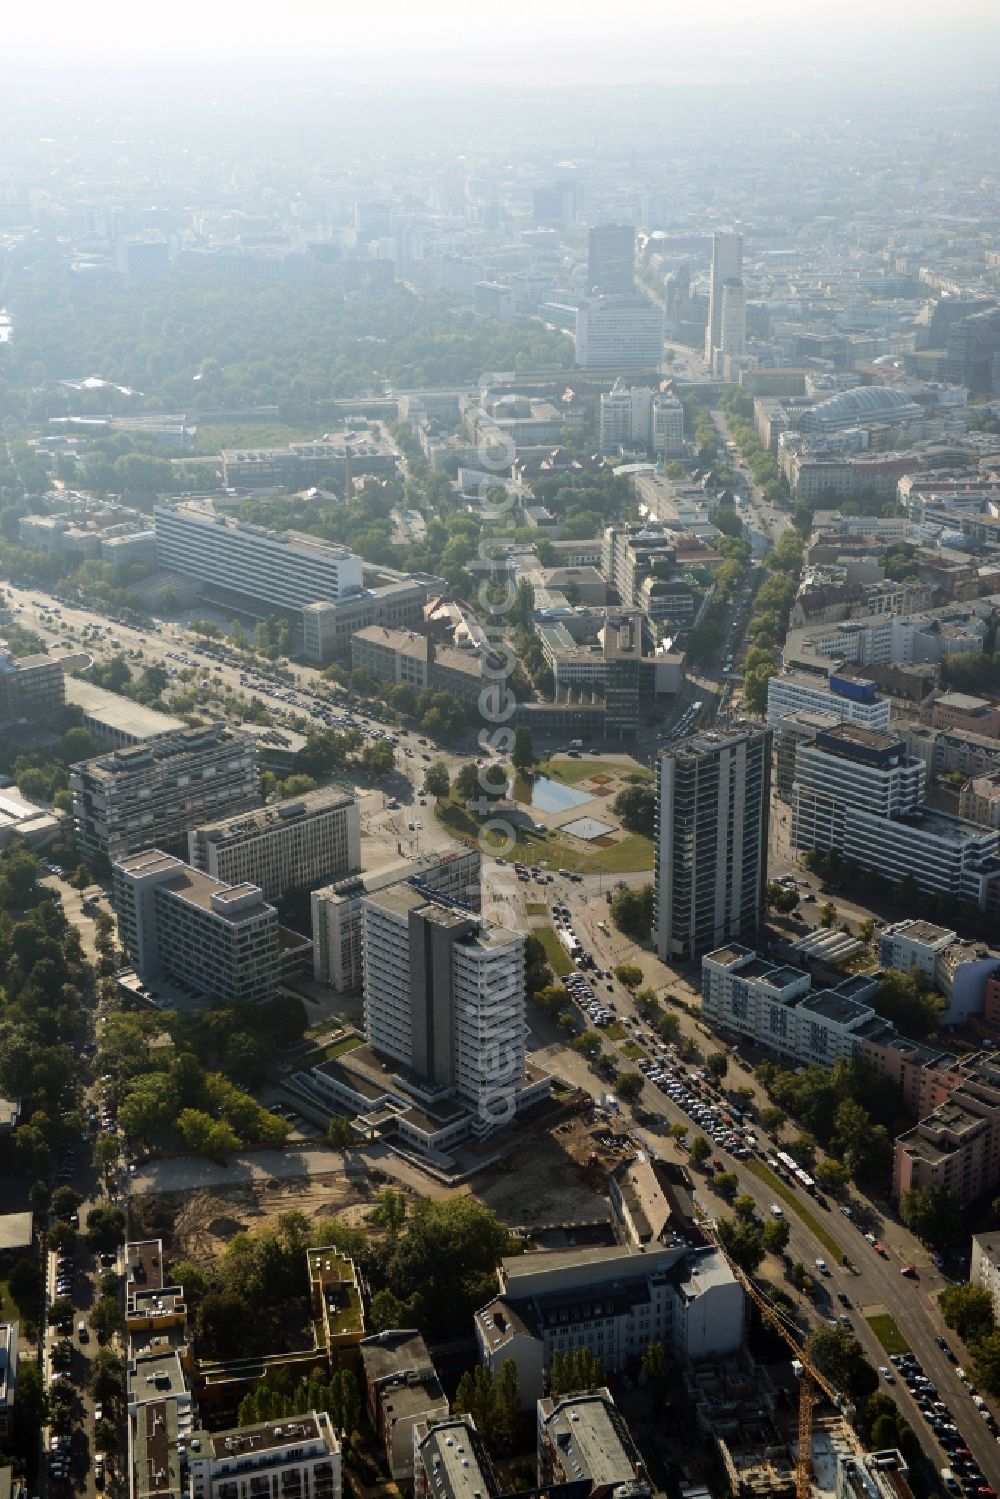 Aerial image Berlin - Residential and commercial area at the Ernst-Reuter-Platz in Berlin Charlottenburg